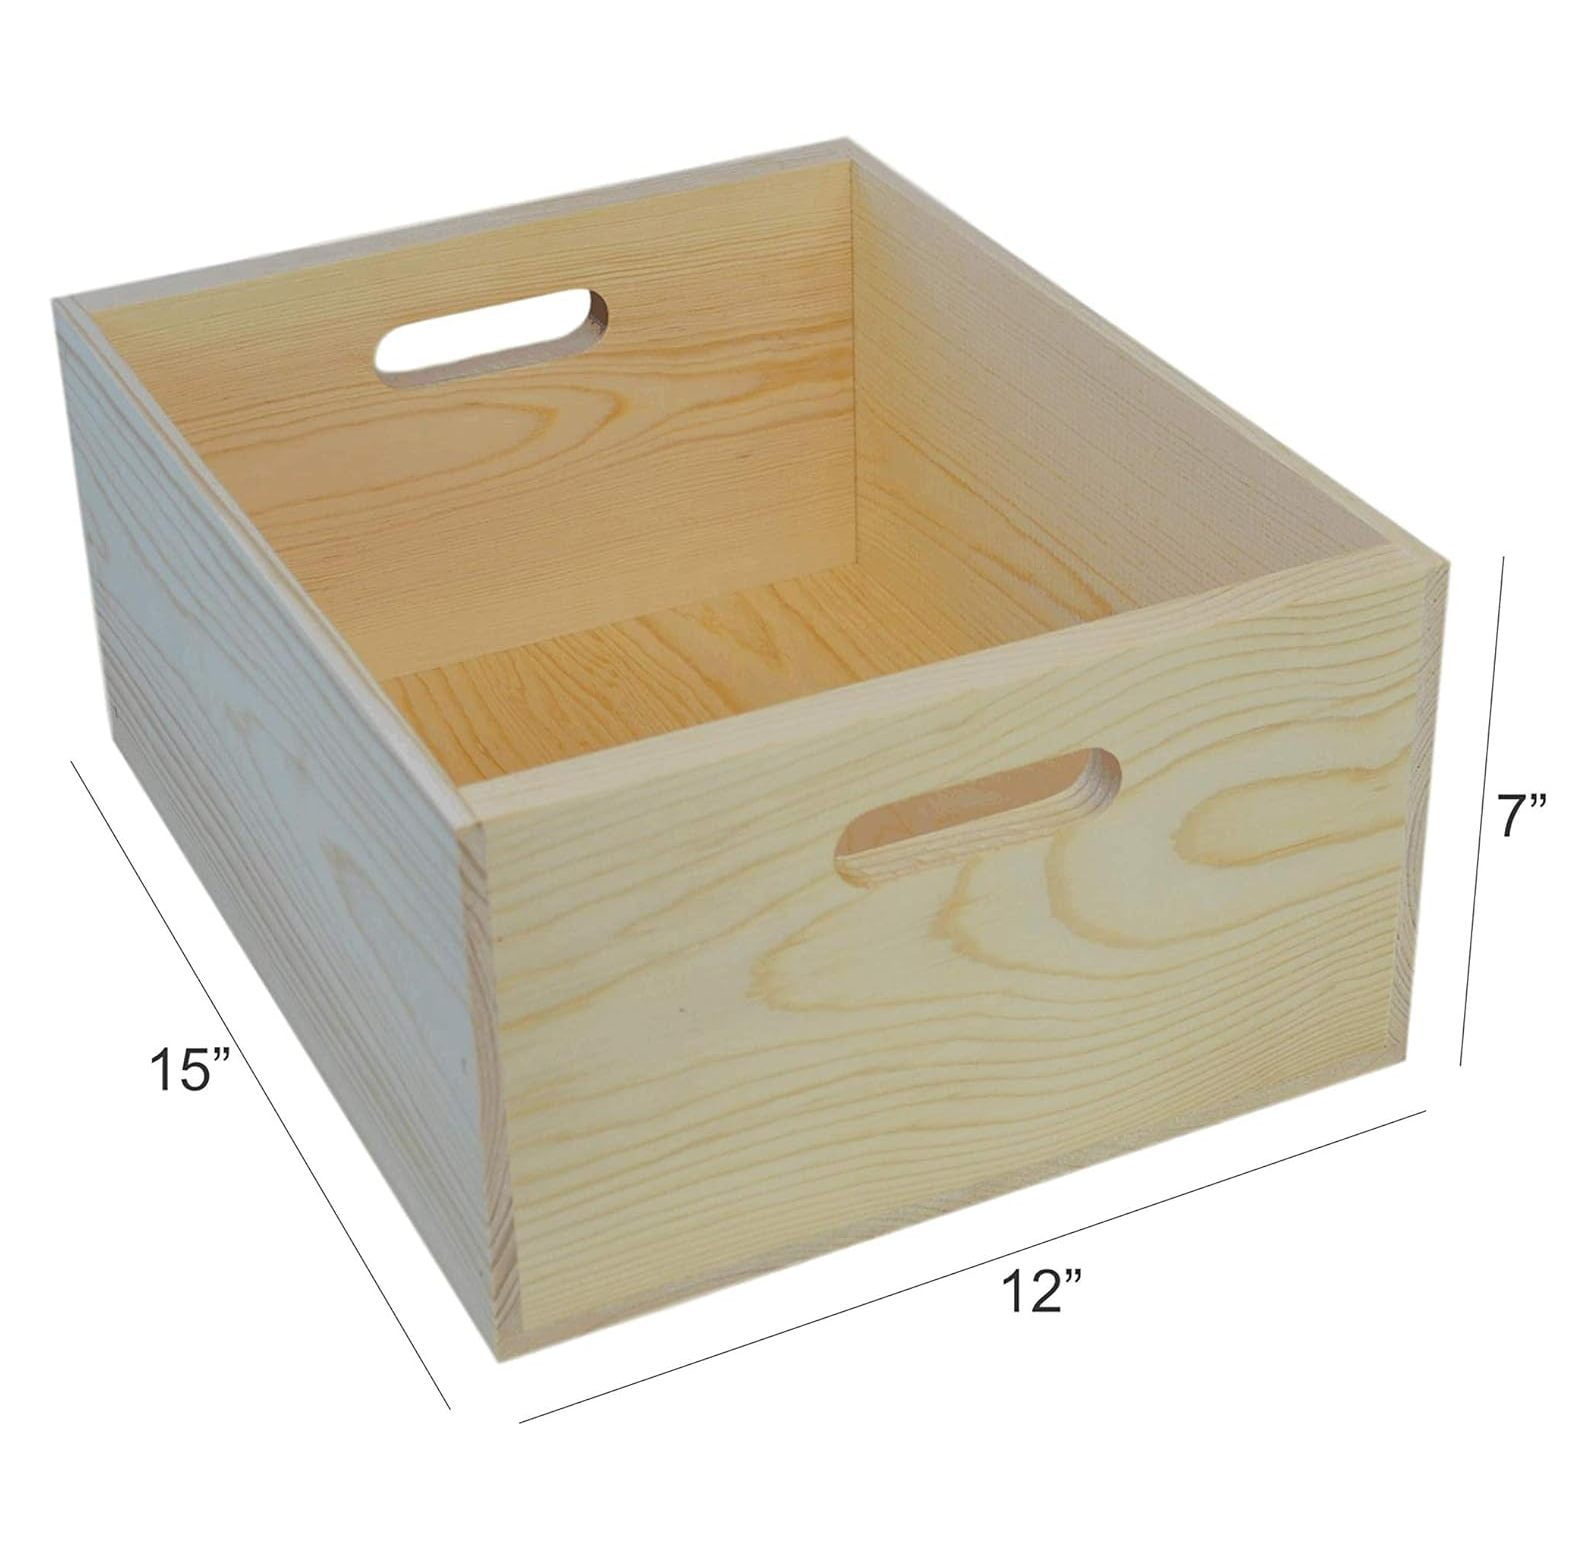 Wooden Chests with Hinged Lids, 2 Sets of 3 Unfinished Wood Decorative  Boxes for Gifts and Crafts, by Woodpeckers